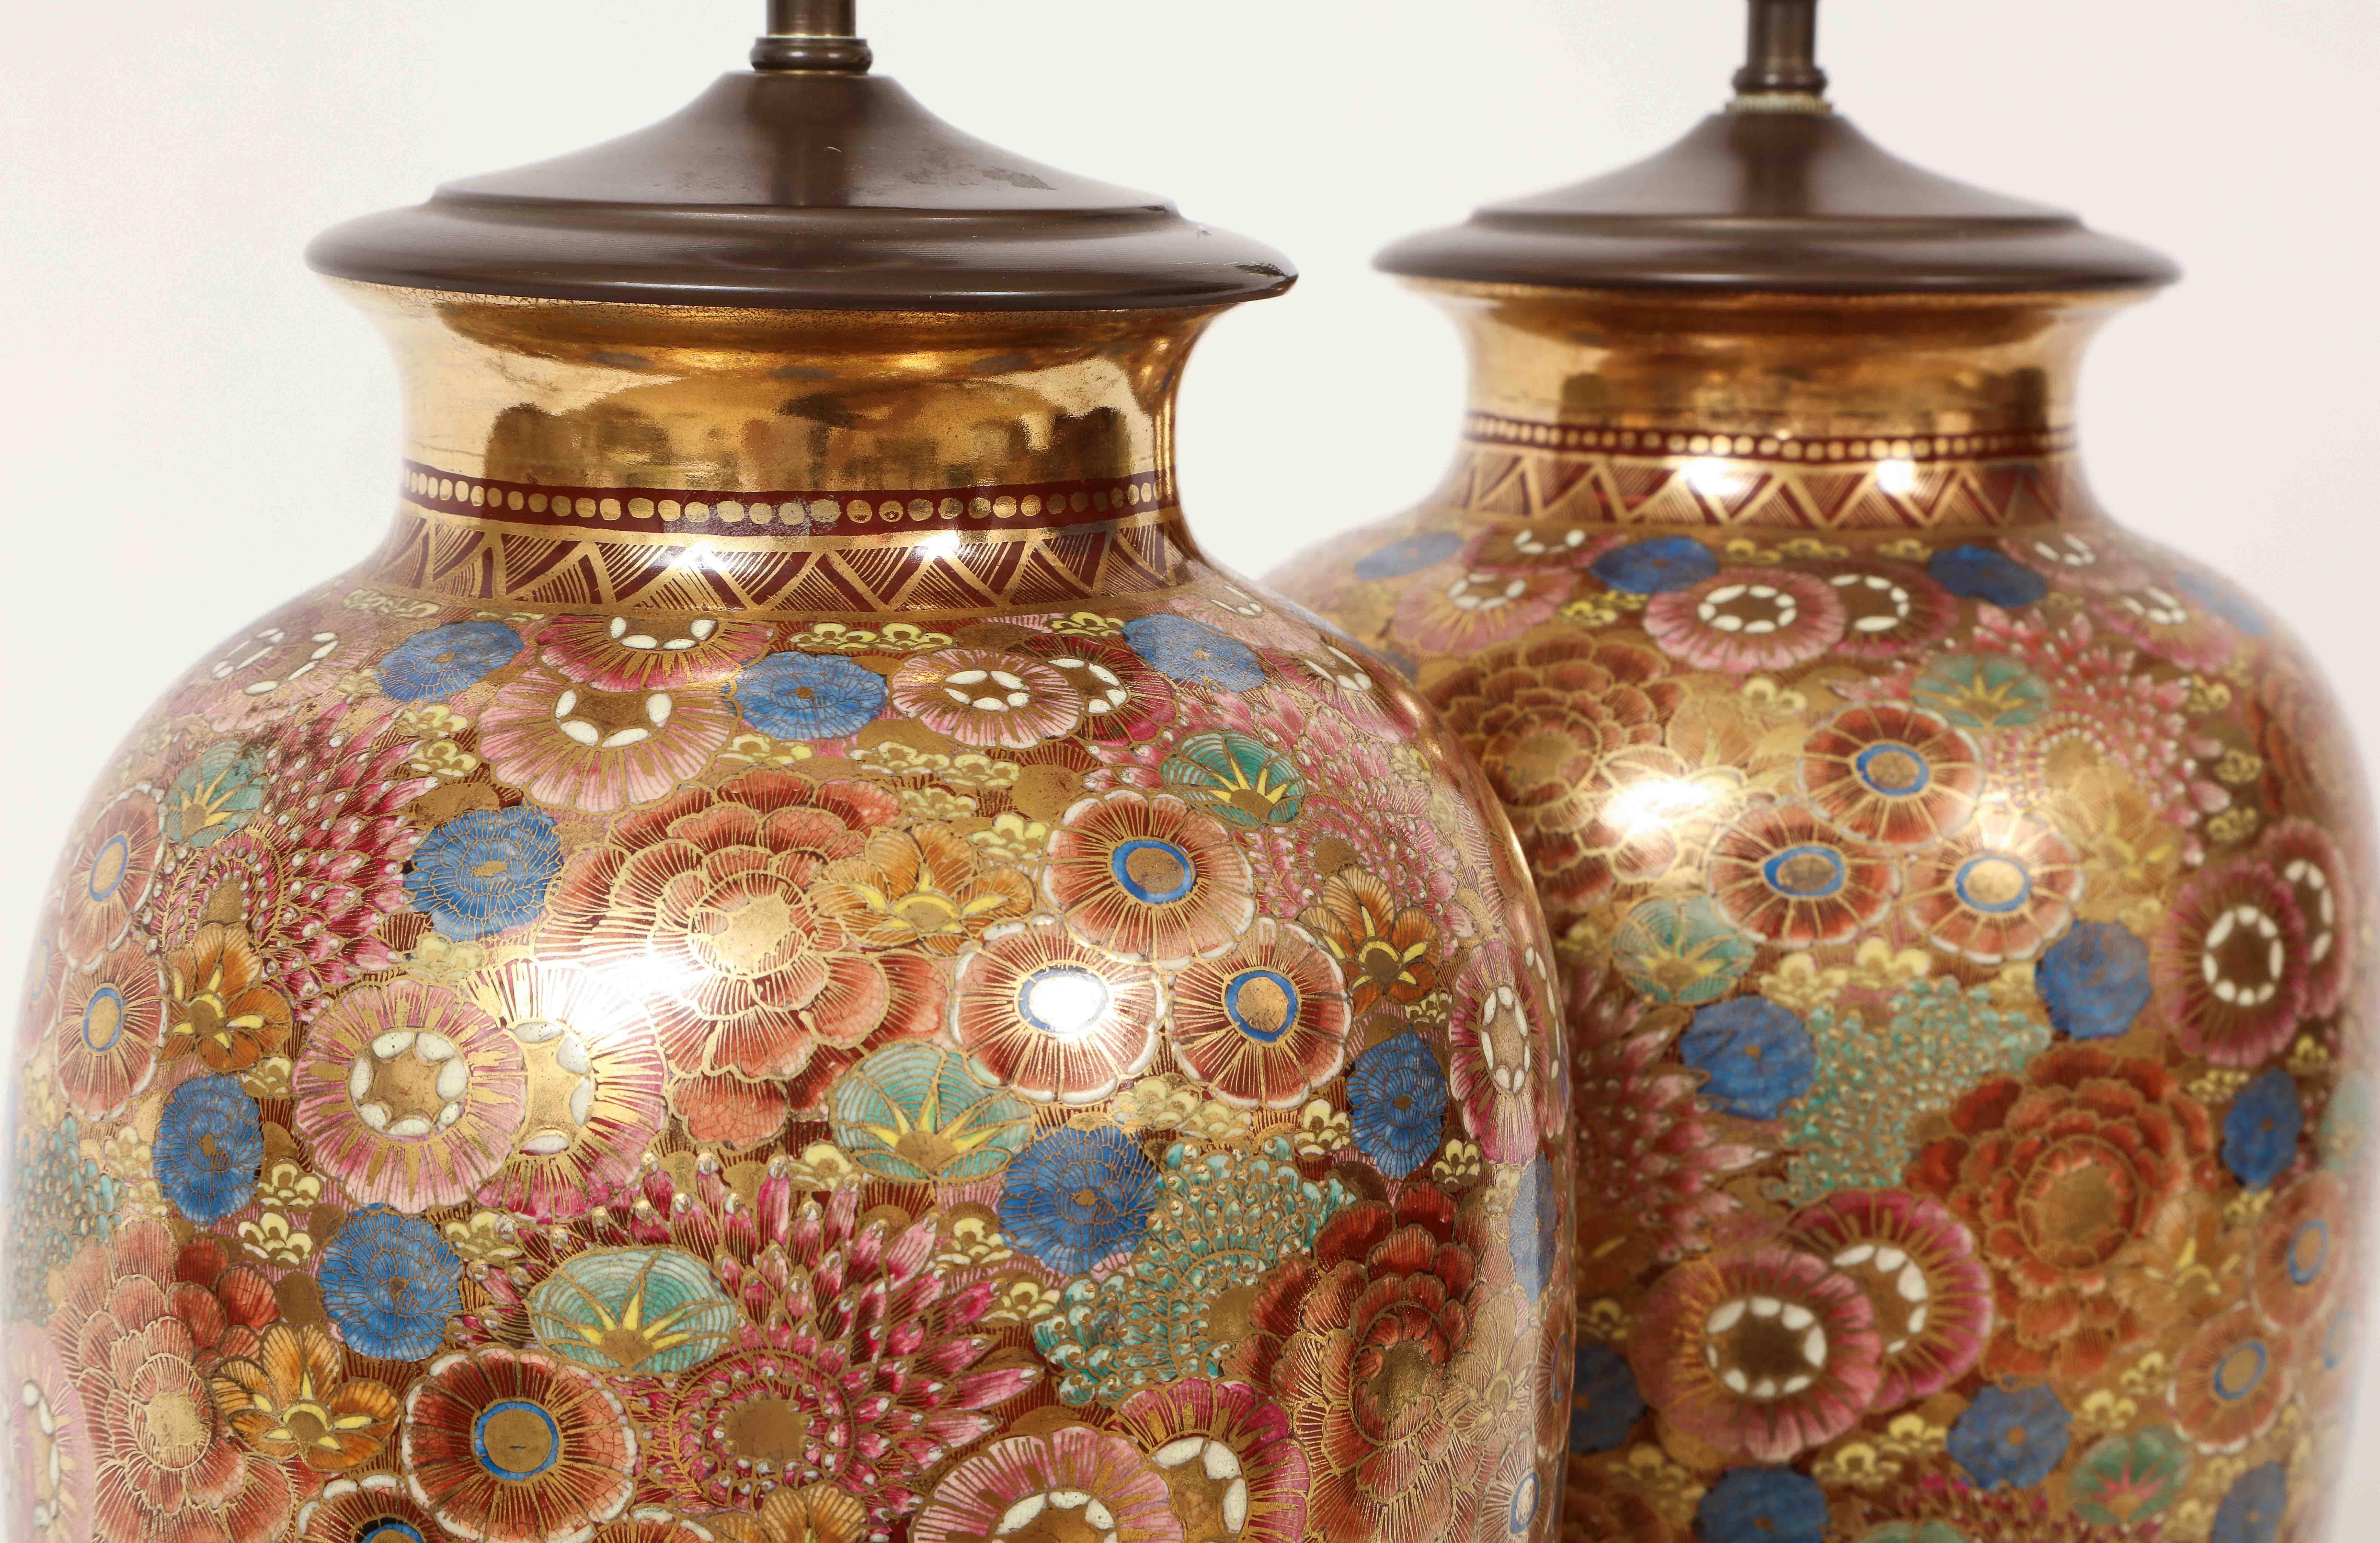 Enameled Pair of Chinese Thousand Flower Porcelain Lamps, circa 1920